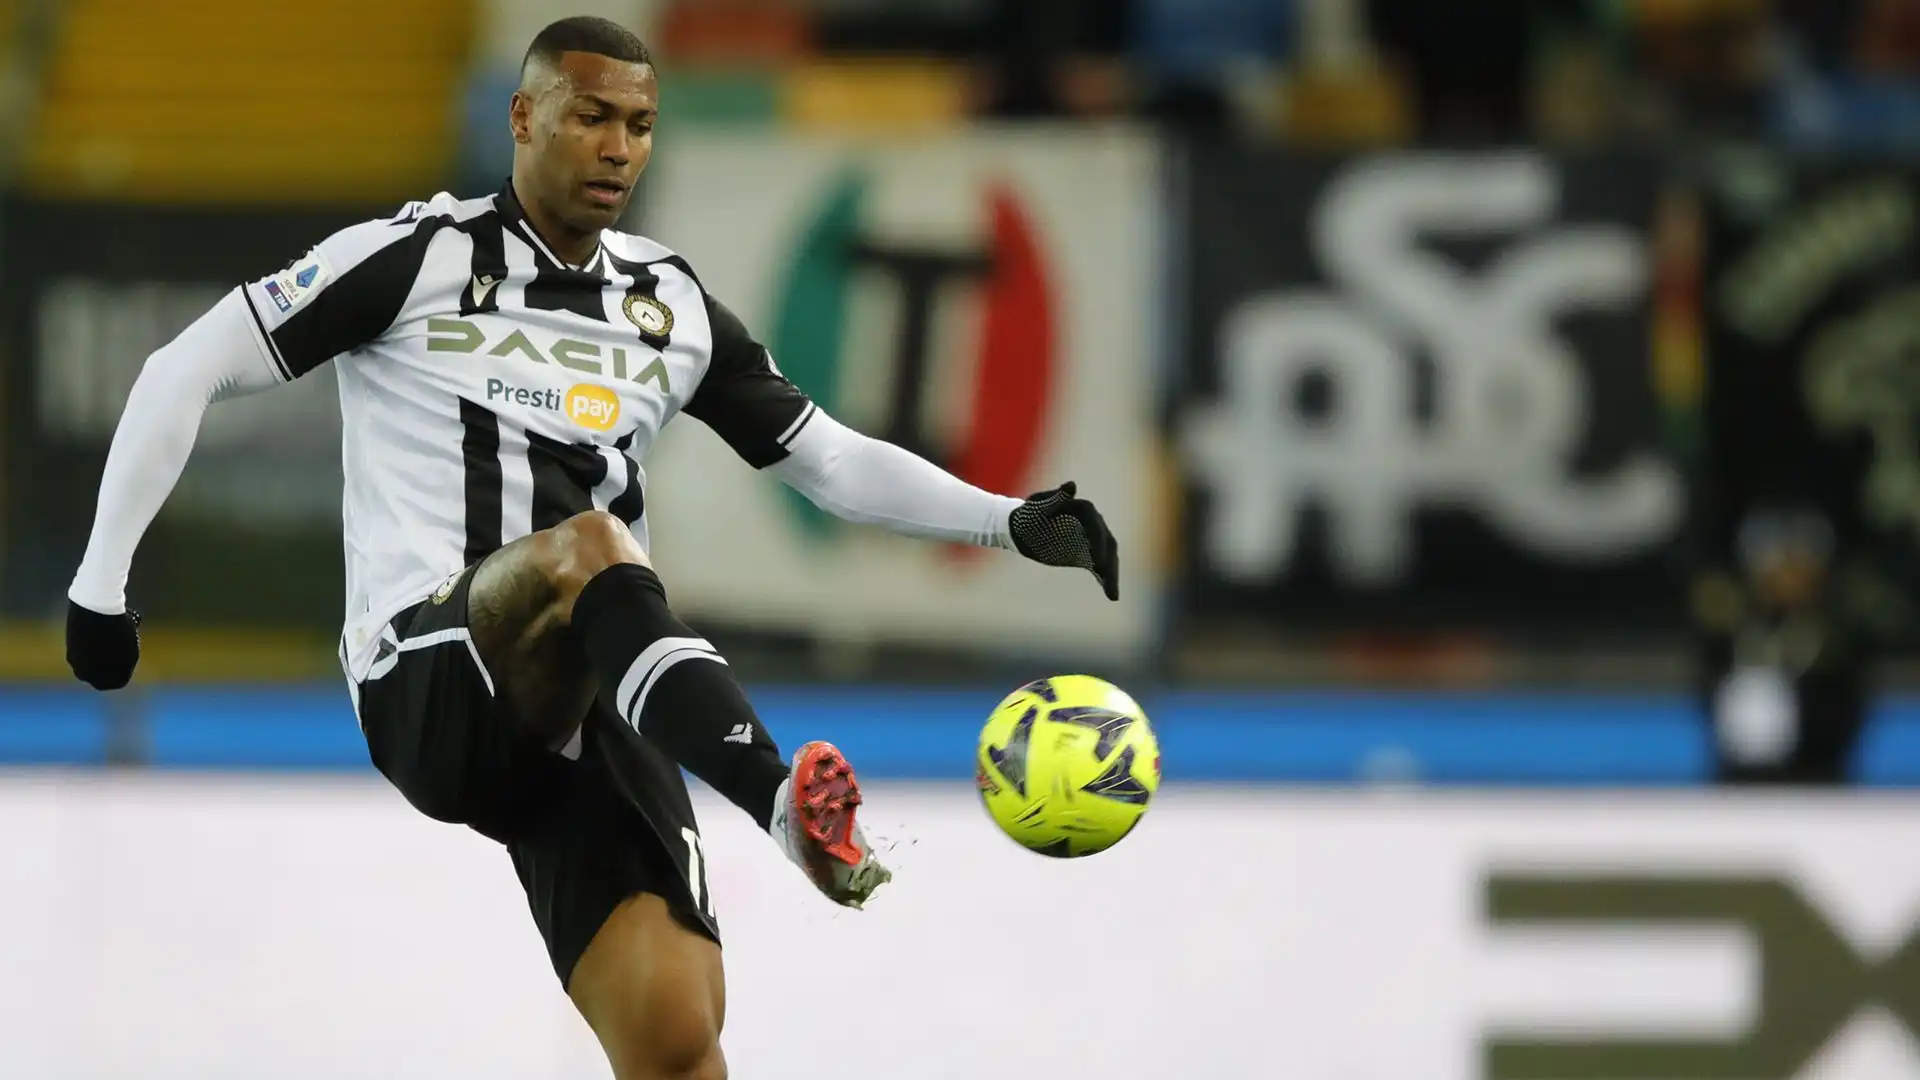 L'Udinese potrebbe perdere Walace